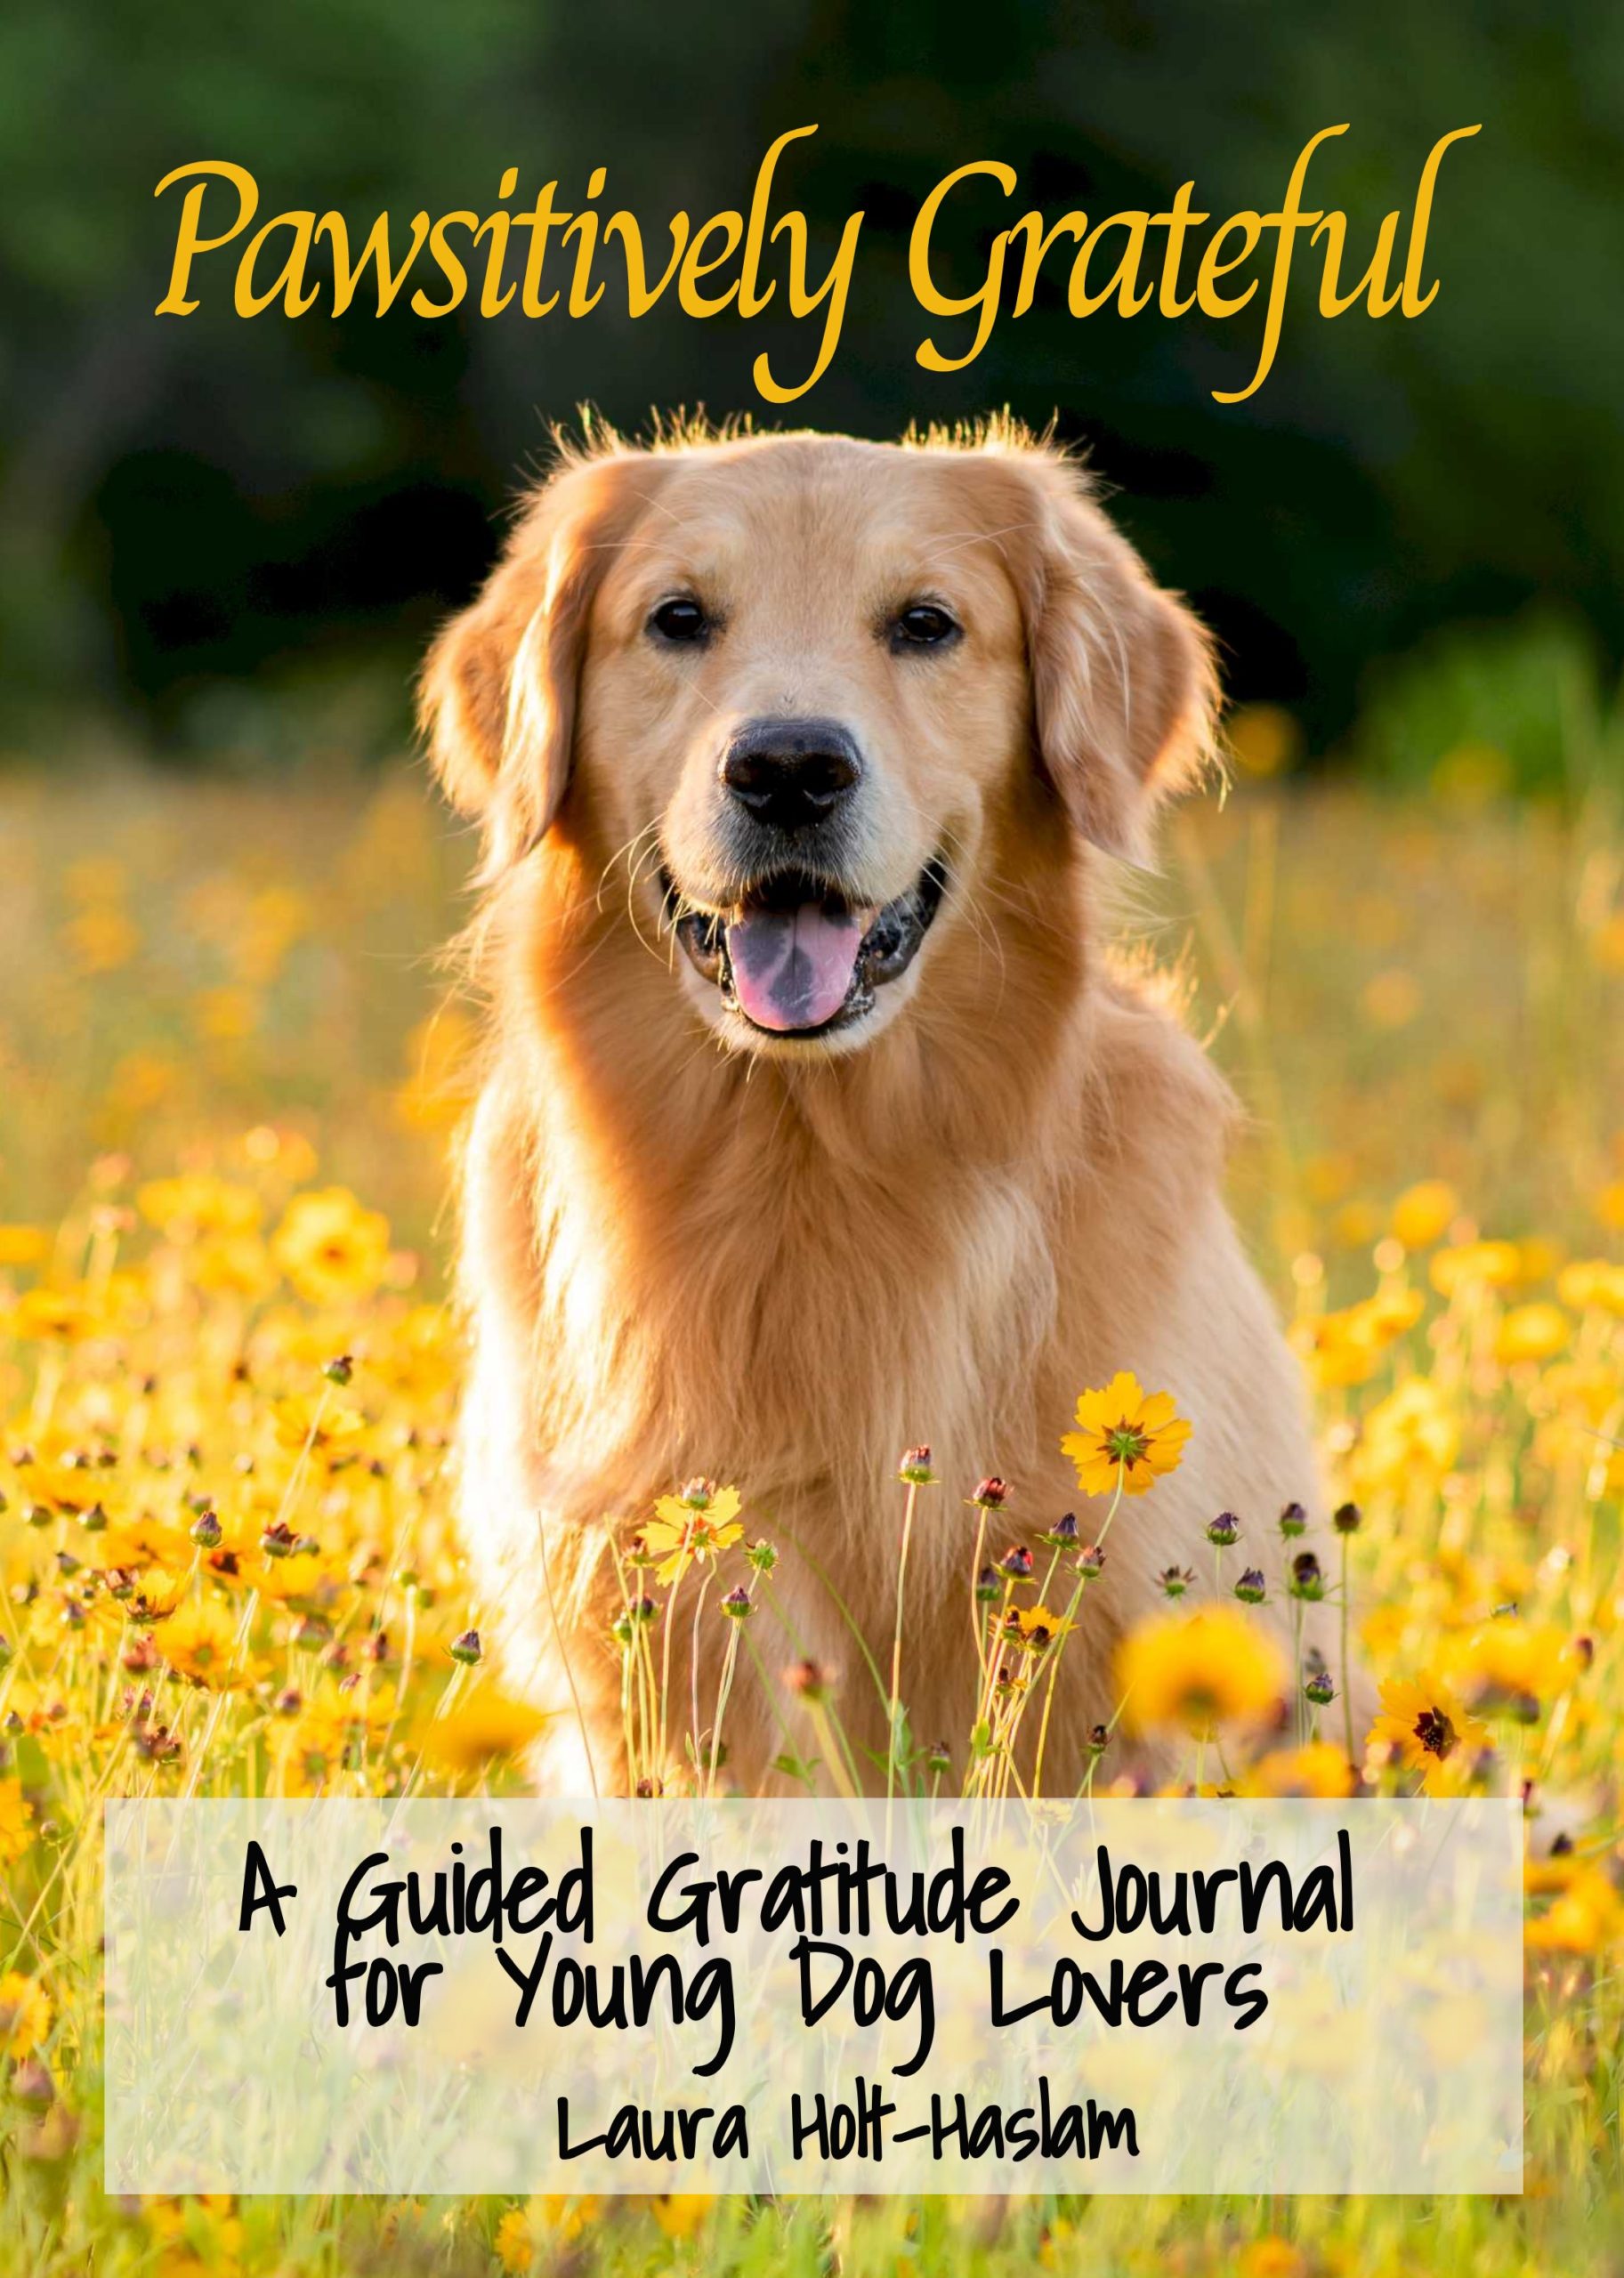 Pawsitively Grateful: A Guided Gratitude Journal for Young Dog Lovers